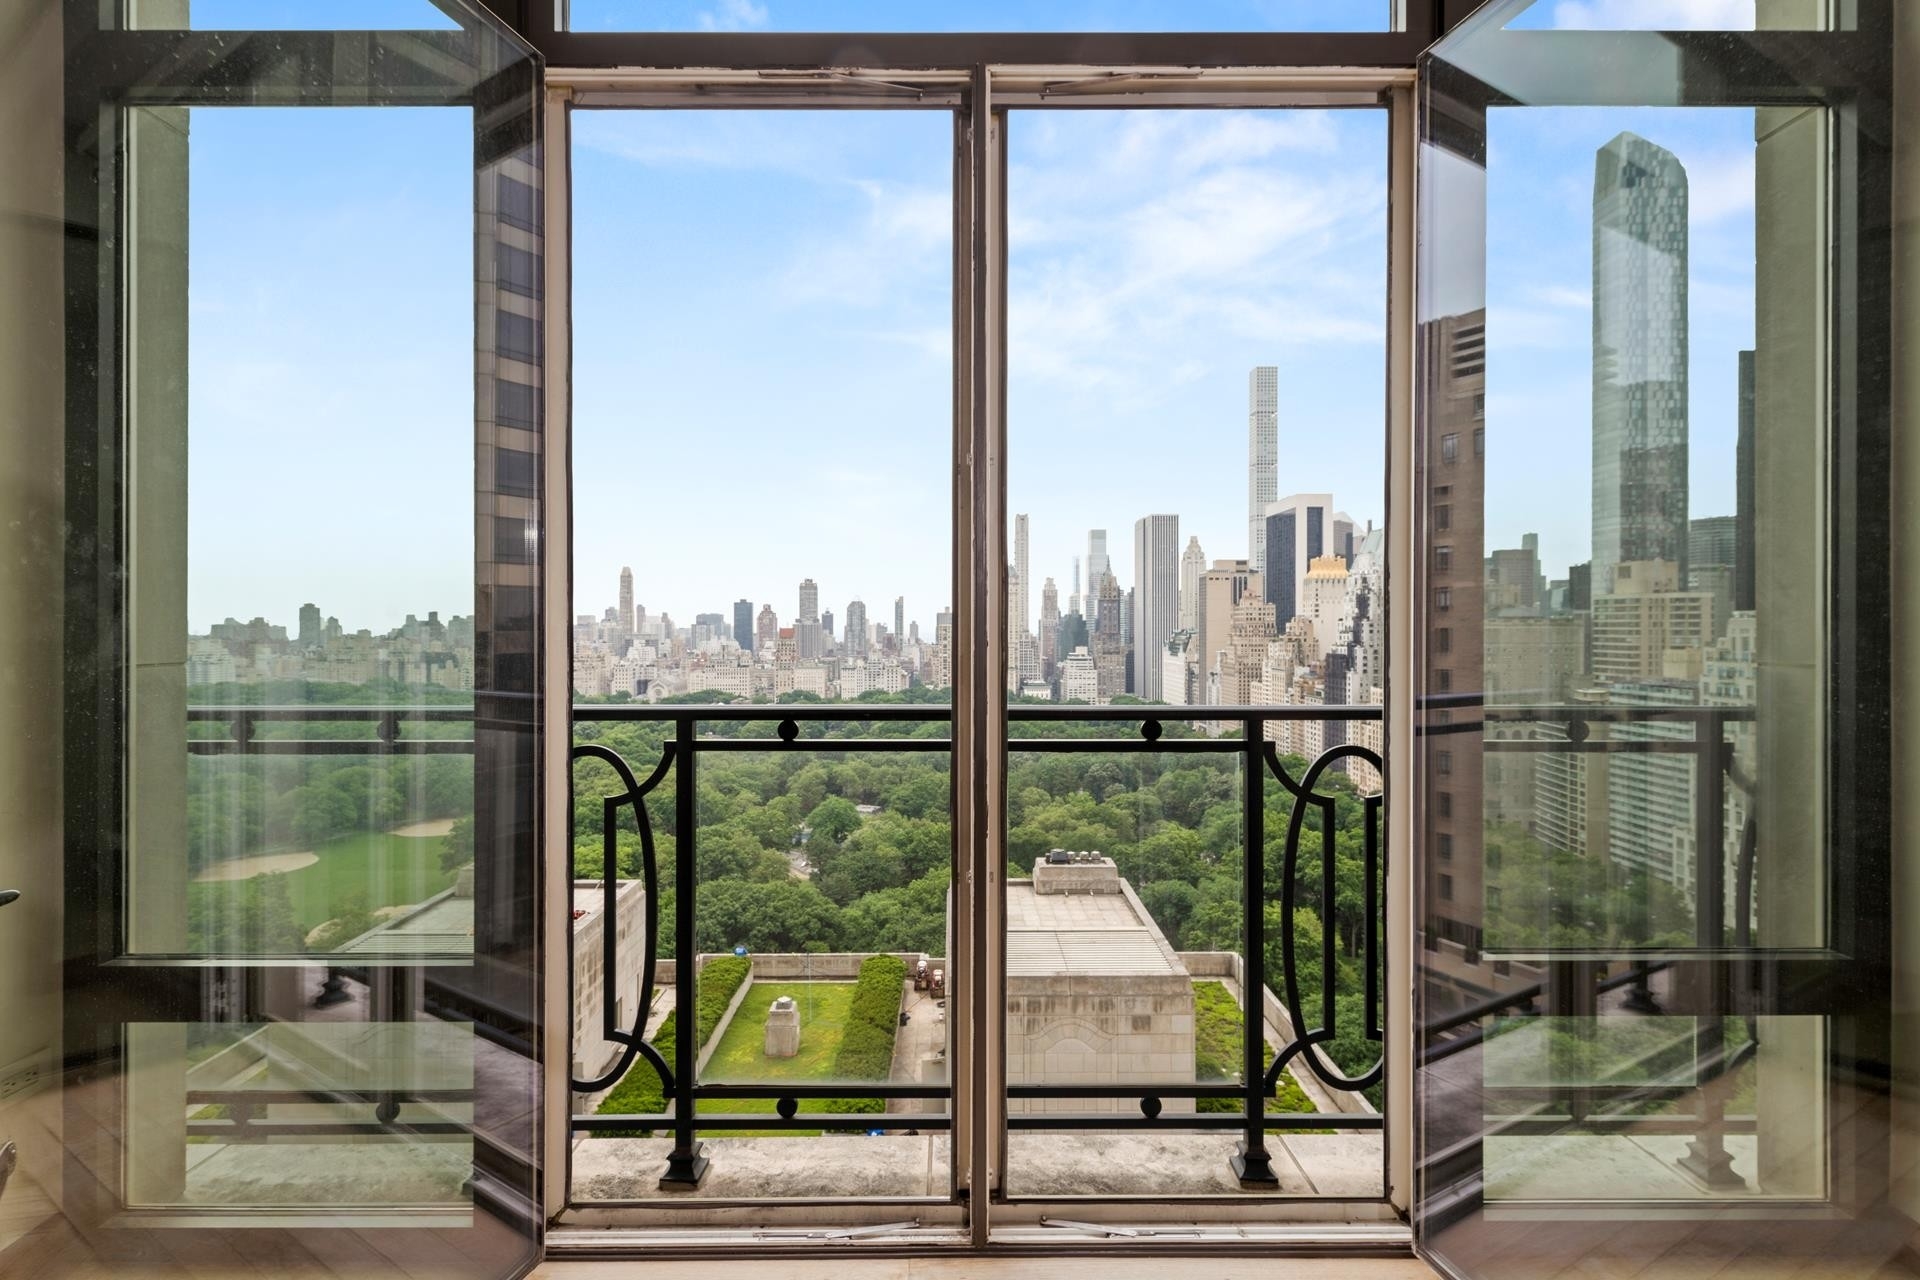 Condominium for Sale at 15 Cpw, 15 CENTRAL PARK W, 26B Lincoln Square, New York, NY 10023